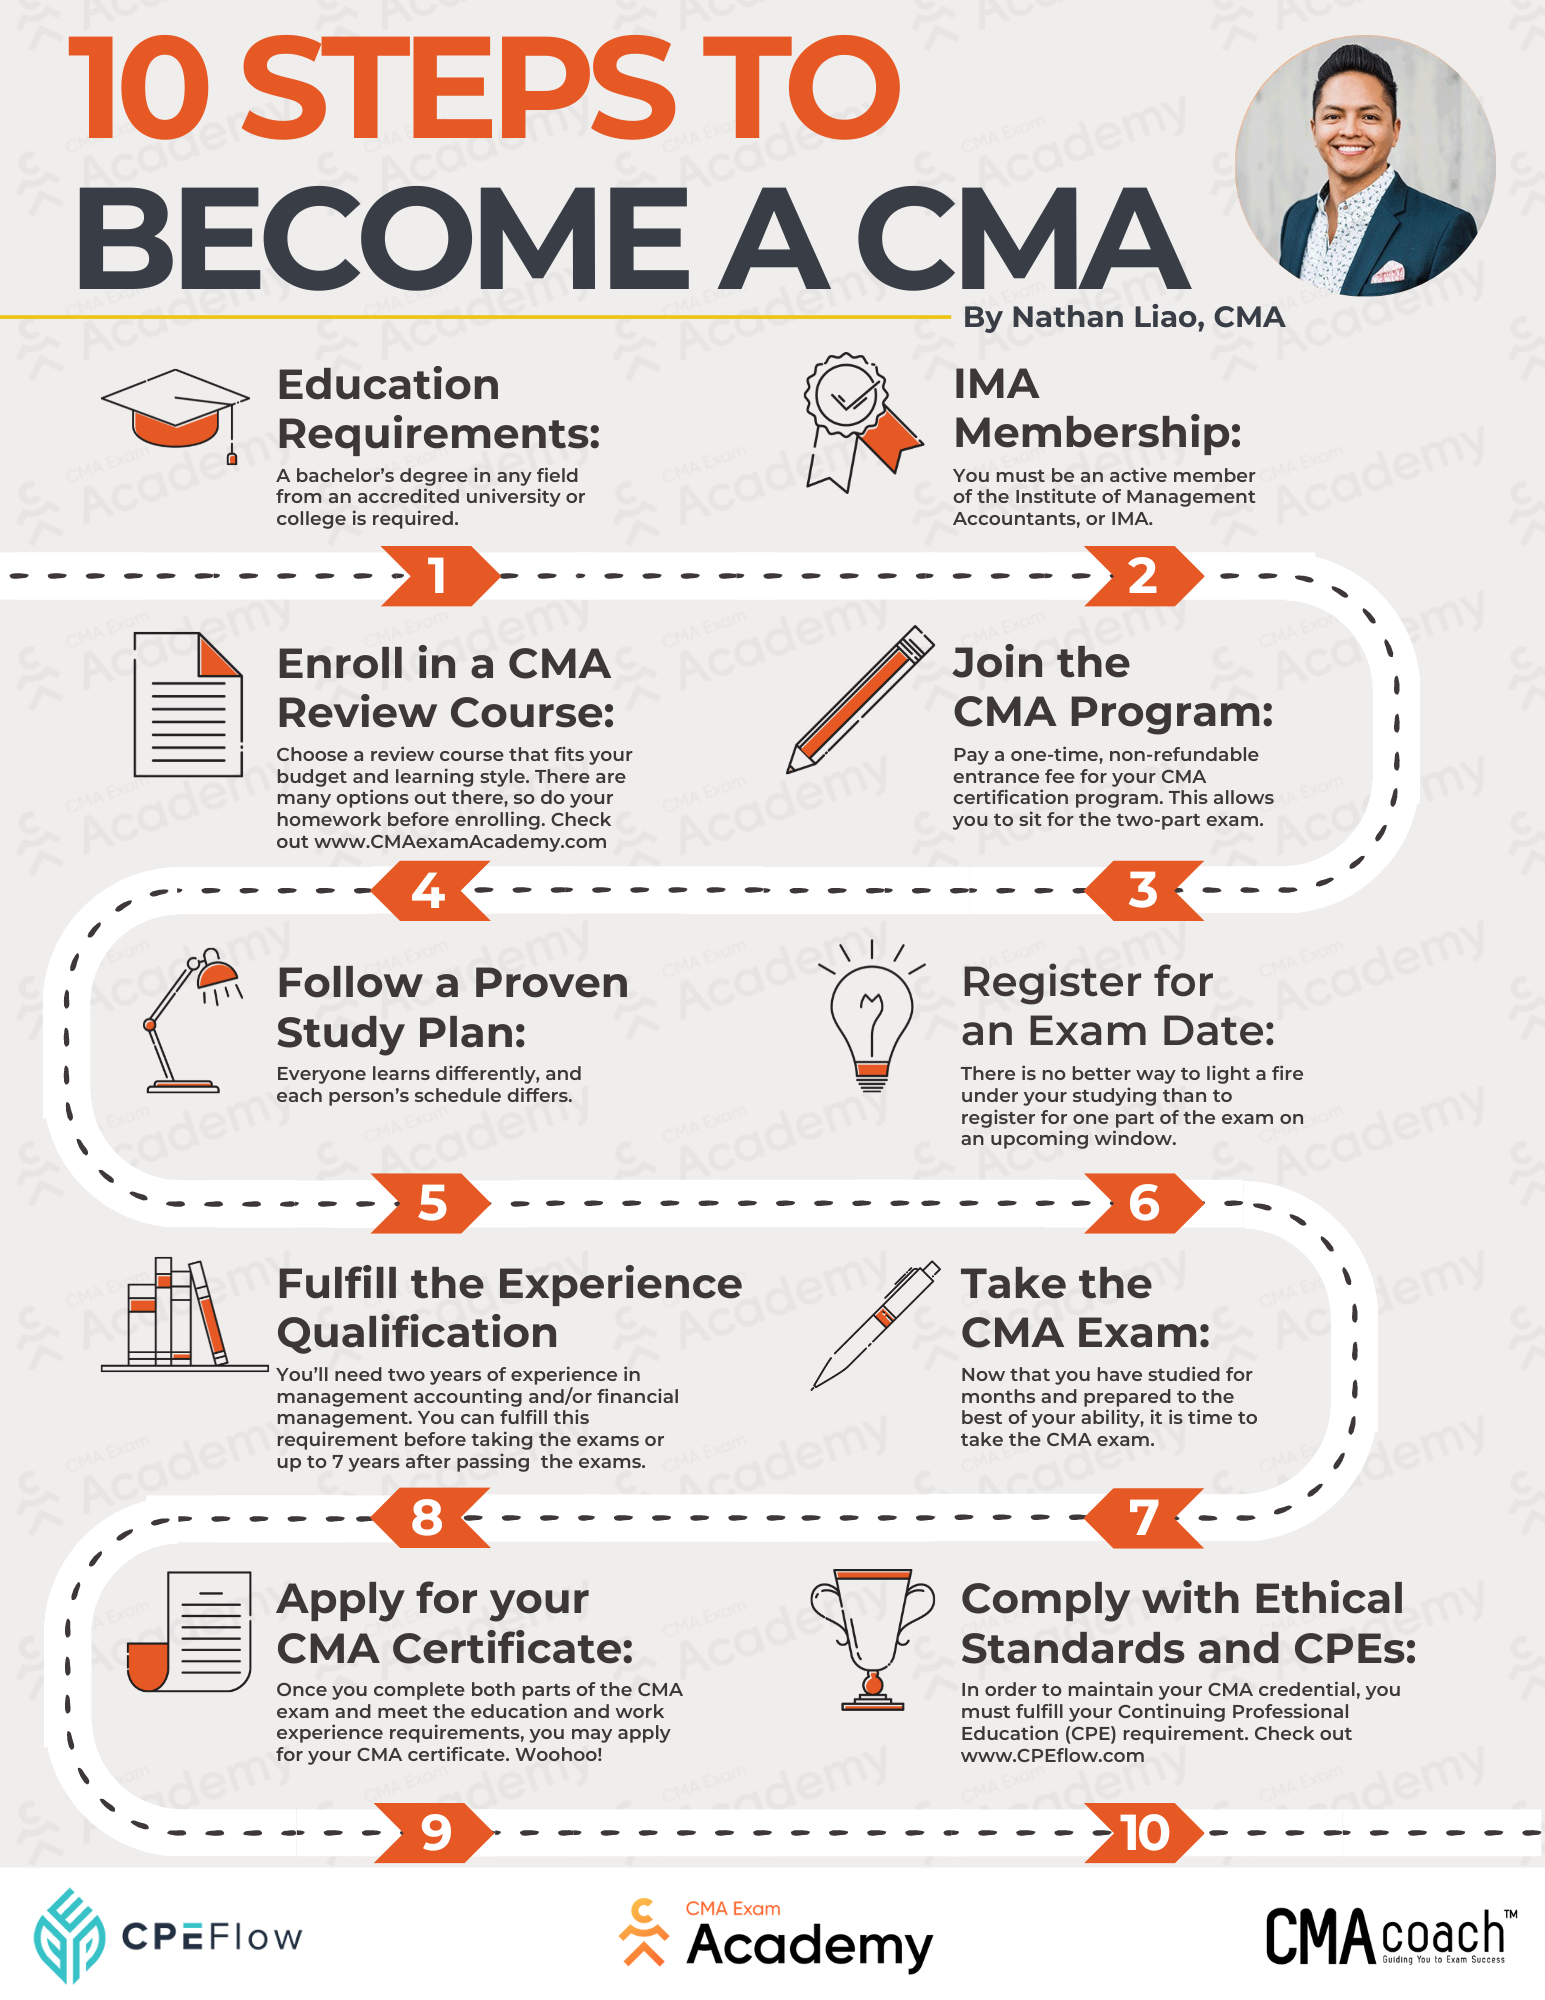 10 Steps to become a CMA infographic